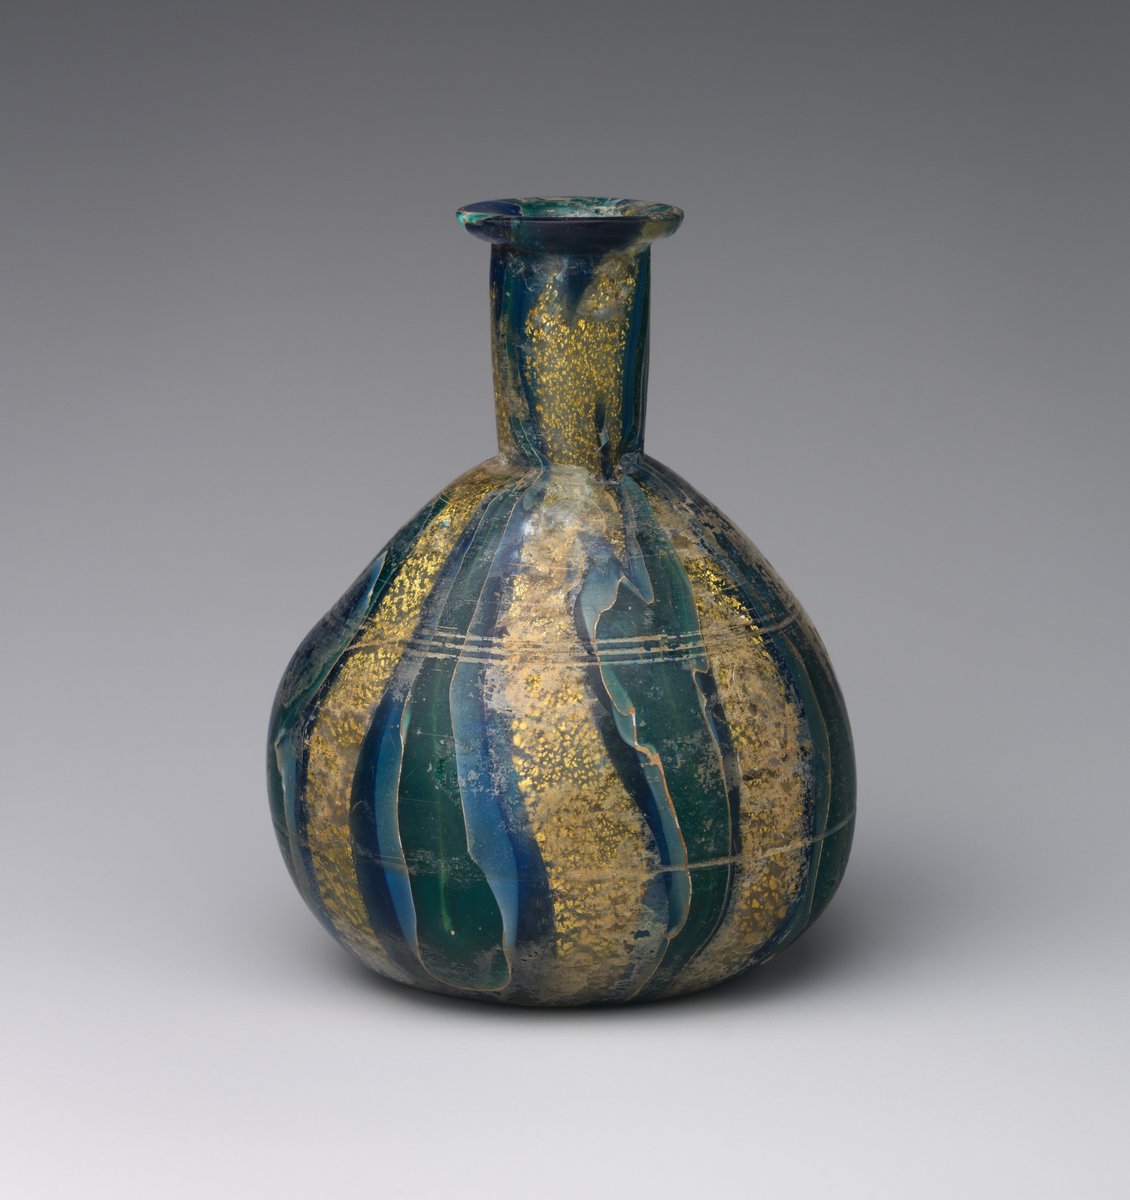 A #Roman glass bottle, in translucent blue, green & white glass encasing gold leaf, probably once used to hold scented oils or perfumes. It is about 2000 years old, but looks absolutely gorgeous, & apart from a few internal cracks, as good as new! (📷 NY Met Museum) #Archaeology